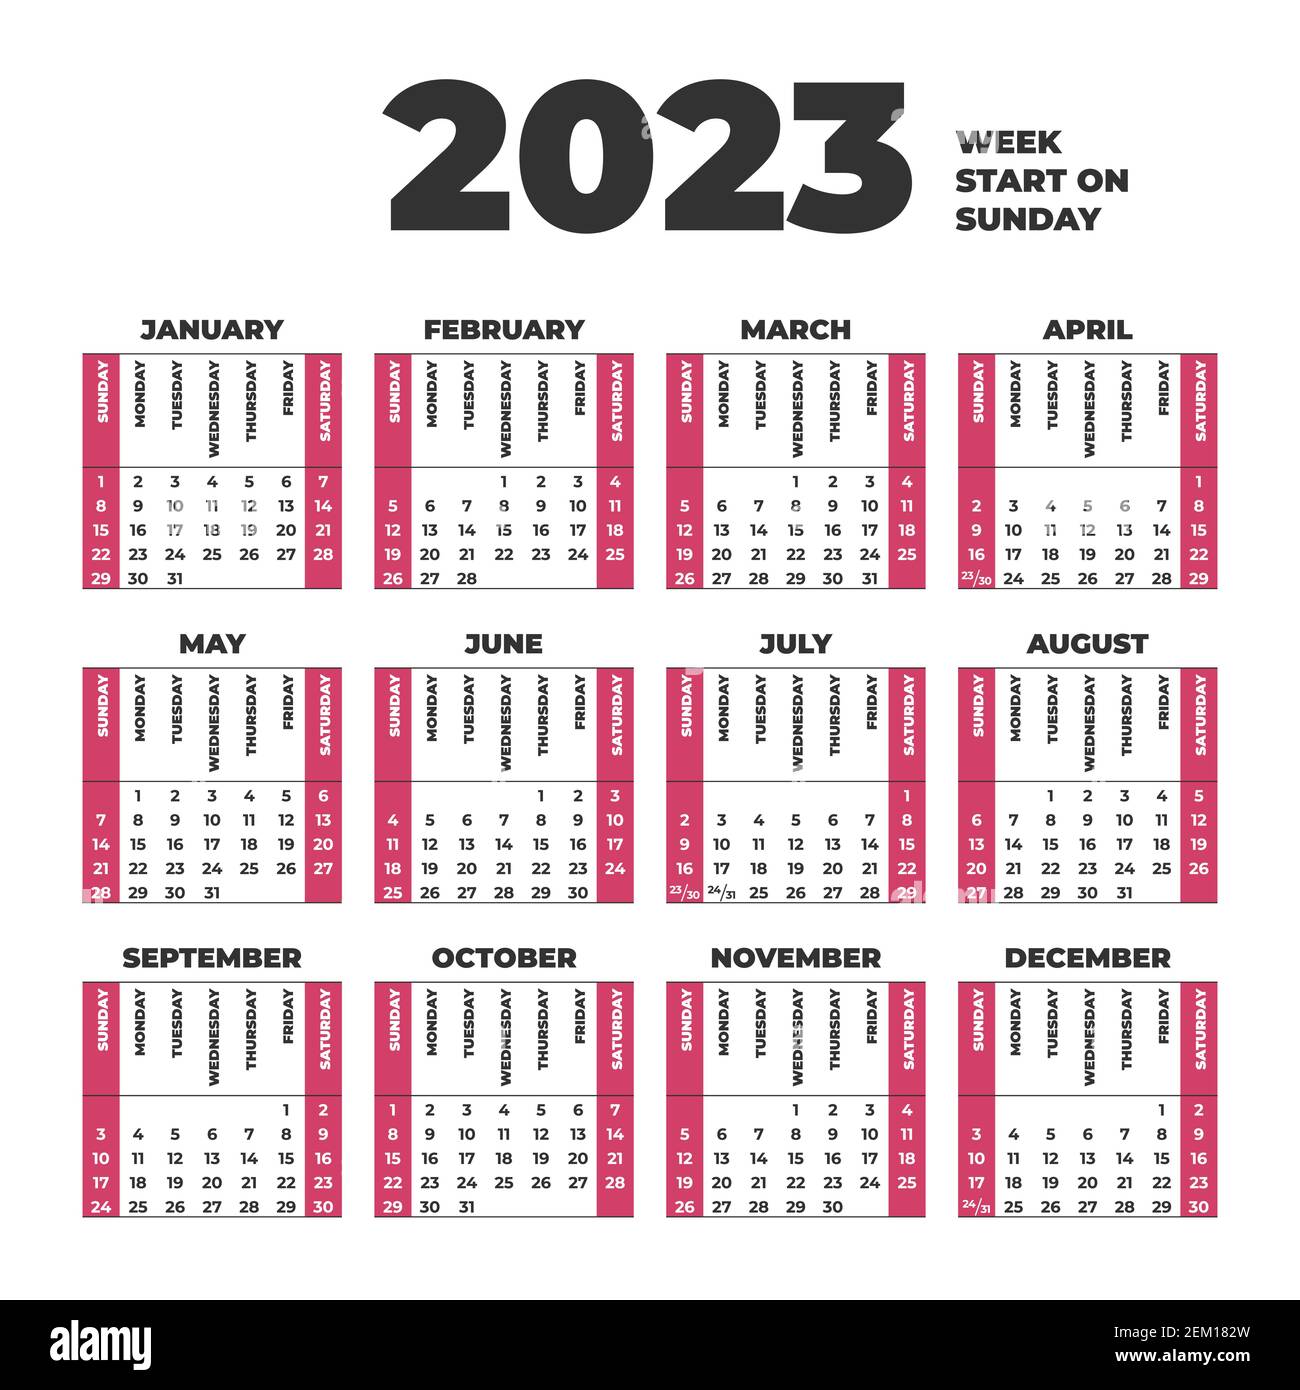 2023 Calendar template with weeks start on Sunday Stock Vector